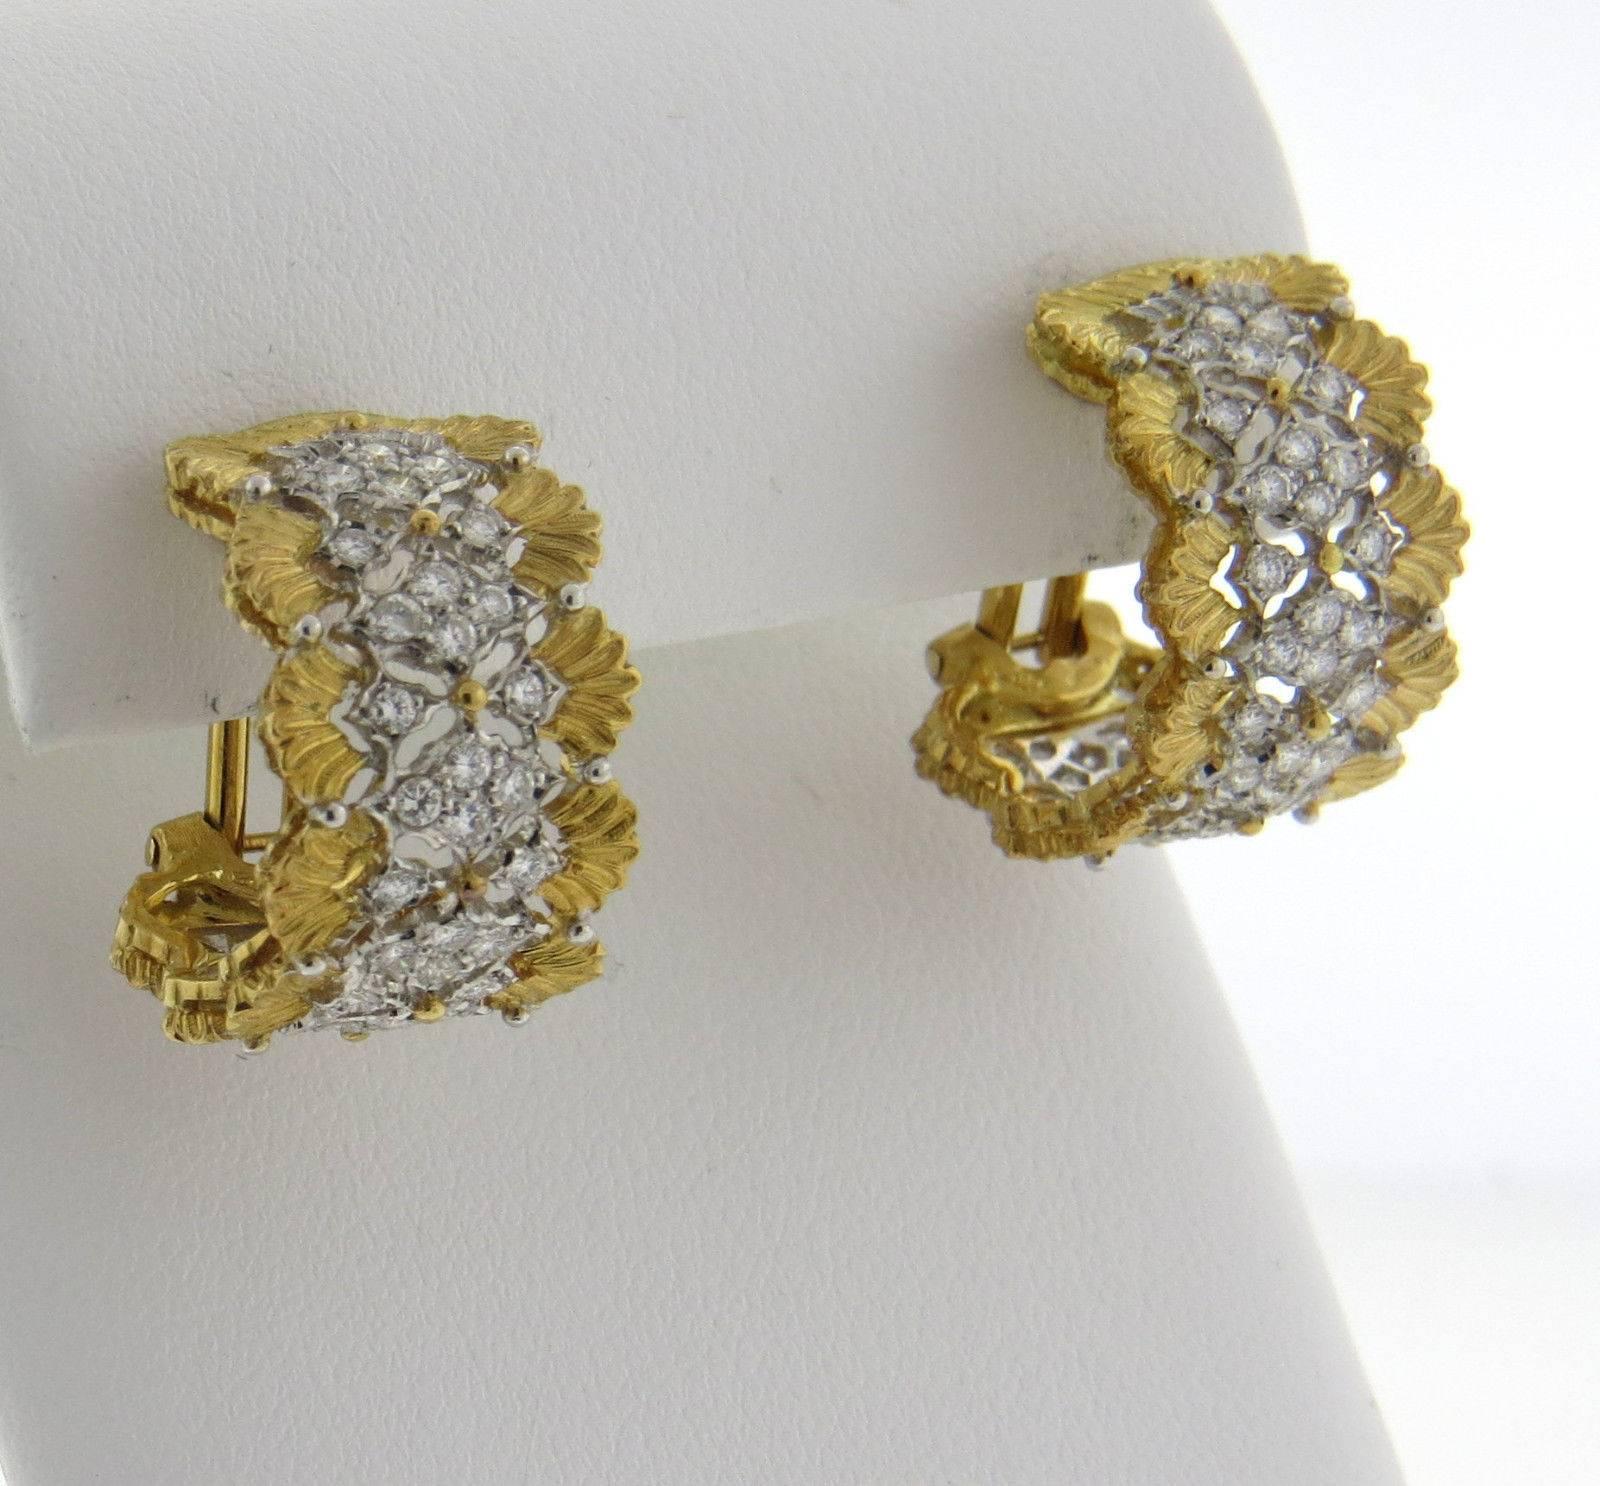 A pair of 18k yellow gold earrings set with approximately 0.65ctw of G/VS diamonds.  Crafted by Buccellati, the earrings measure 20mm x 13mm and weigh 11 grams.  Marked: Buccellati Italy 18K.